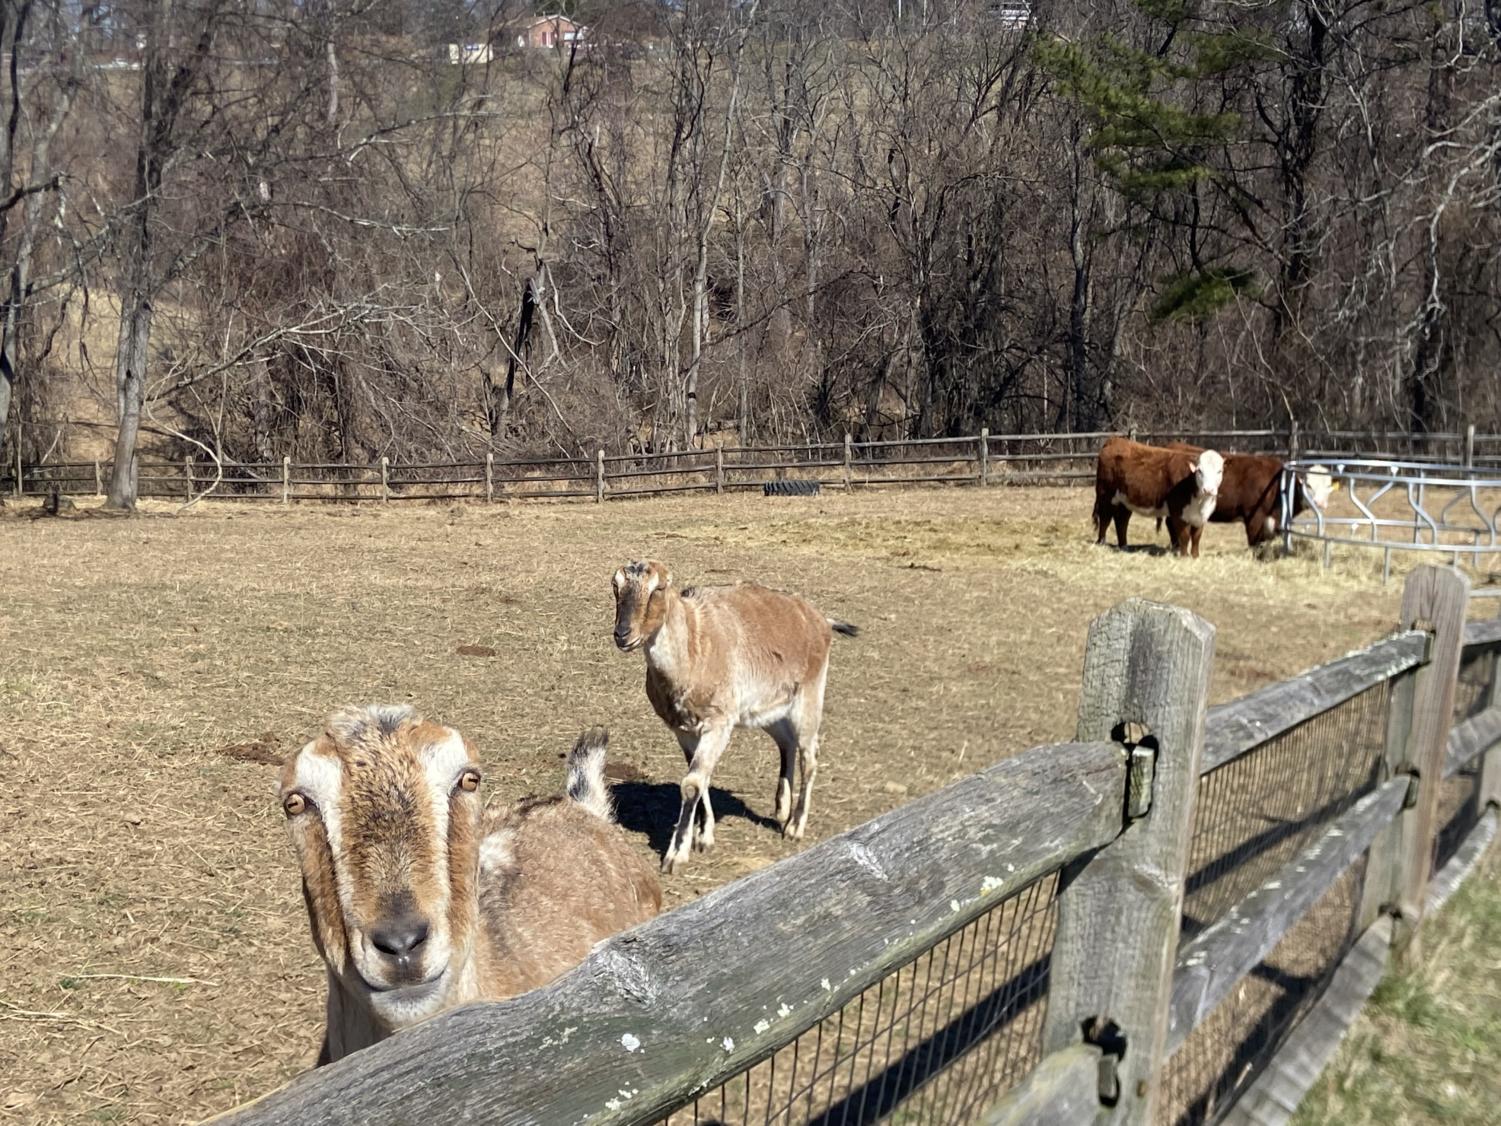 Part of Hereford’s agricultural program includes caring for animals, which ensures that future farmers and wildlife caretakers will treat them in a humane and ethical way.  